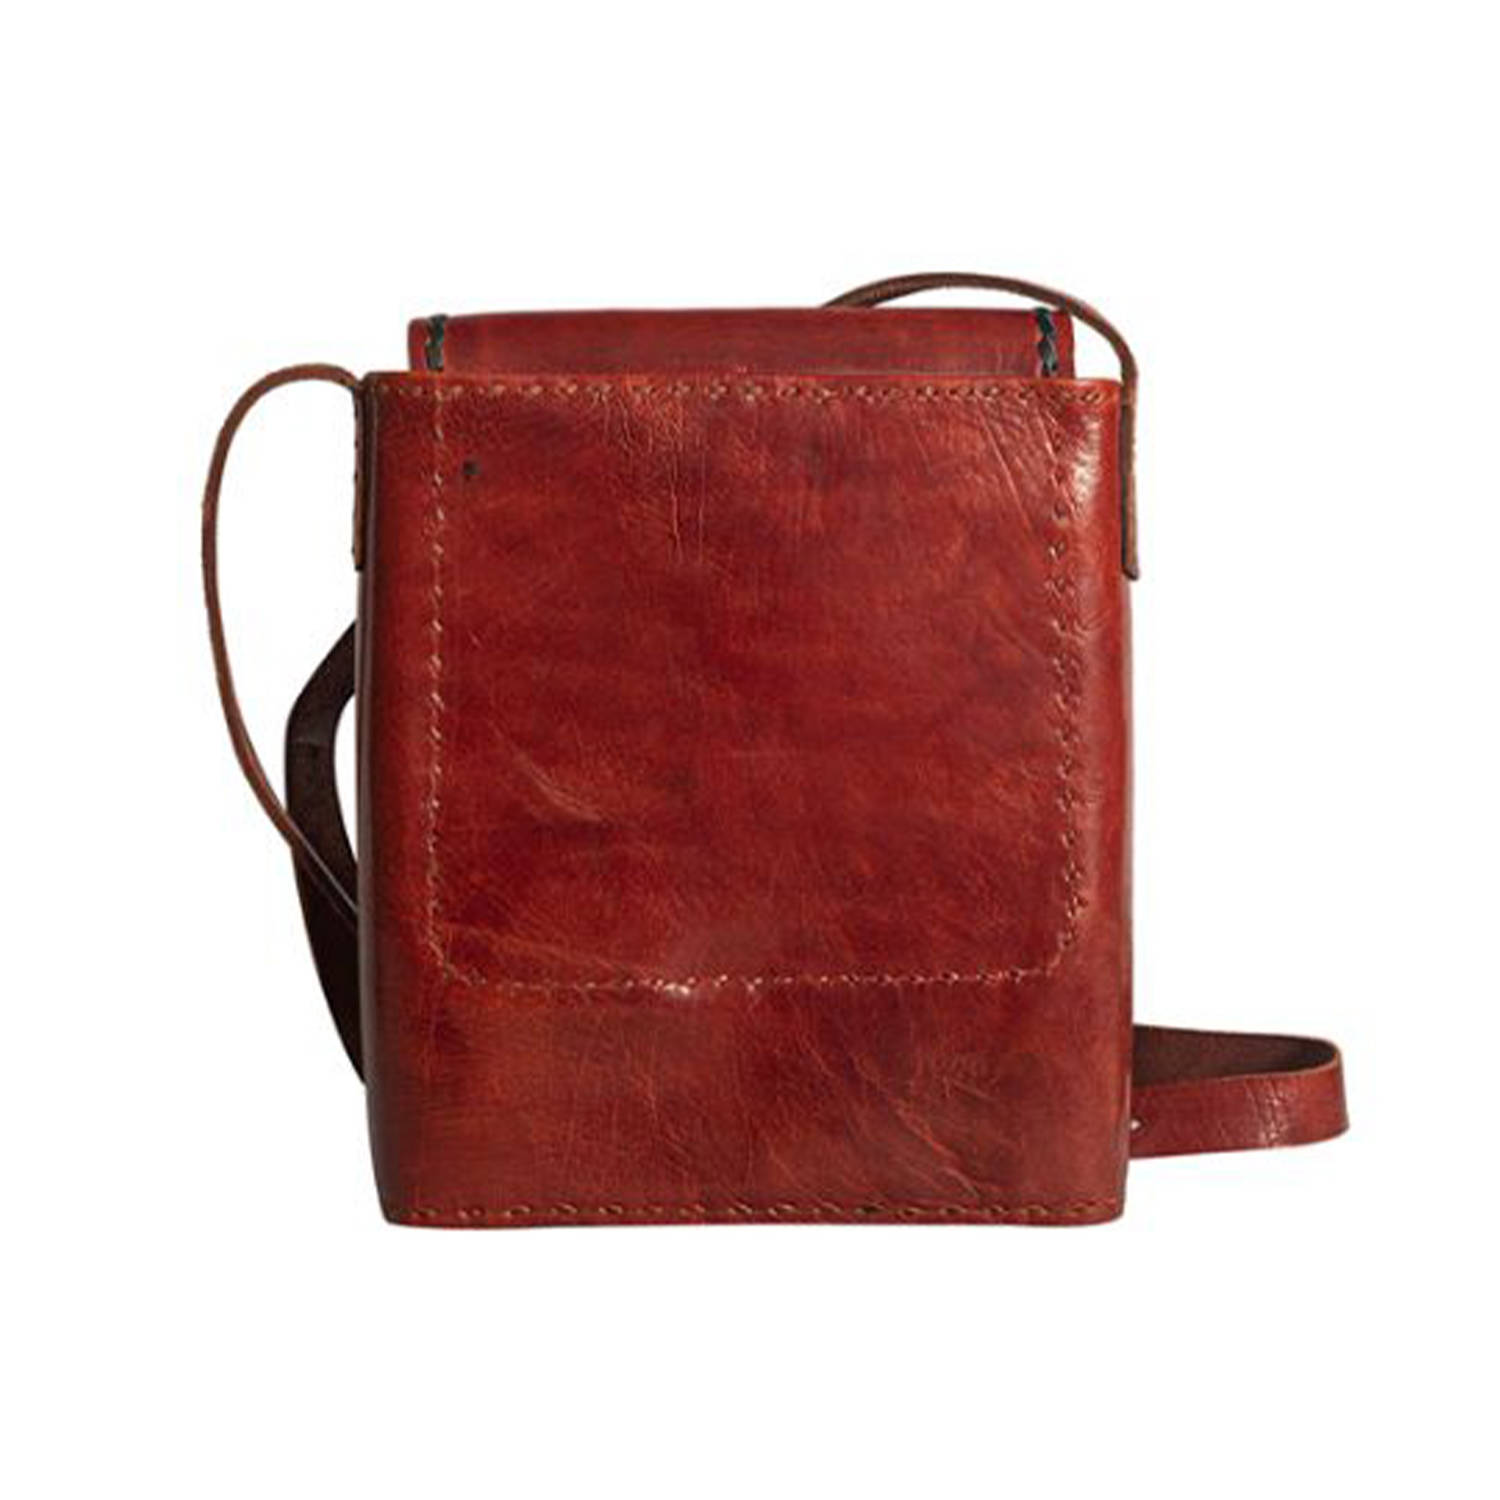 Florence Leather Market is synonymous with high quality and sophistication,  come take a look at the online shop